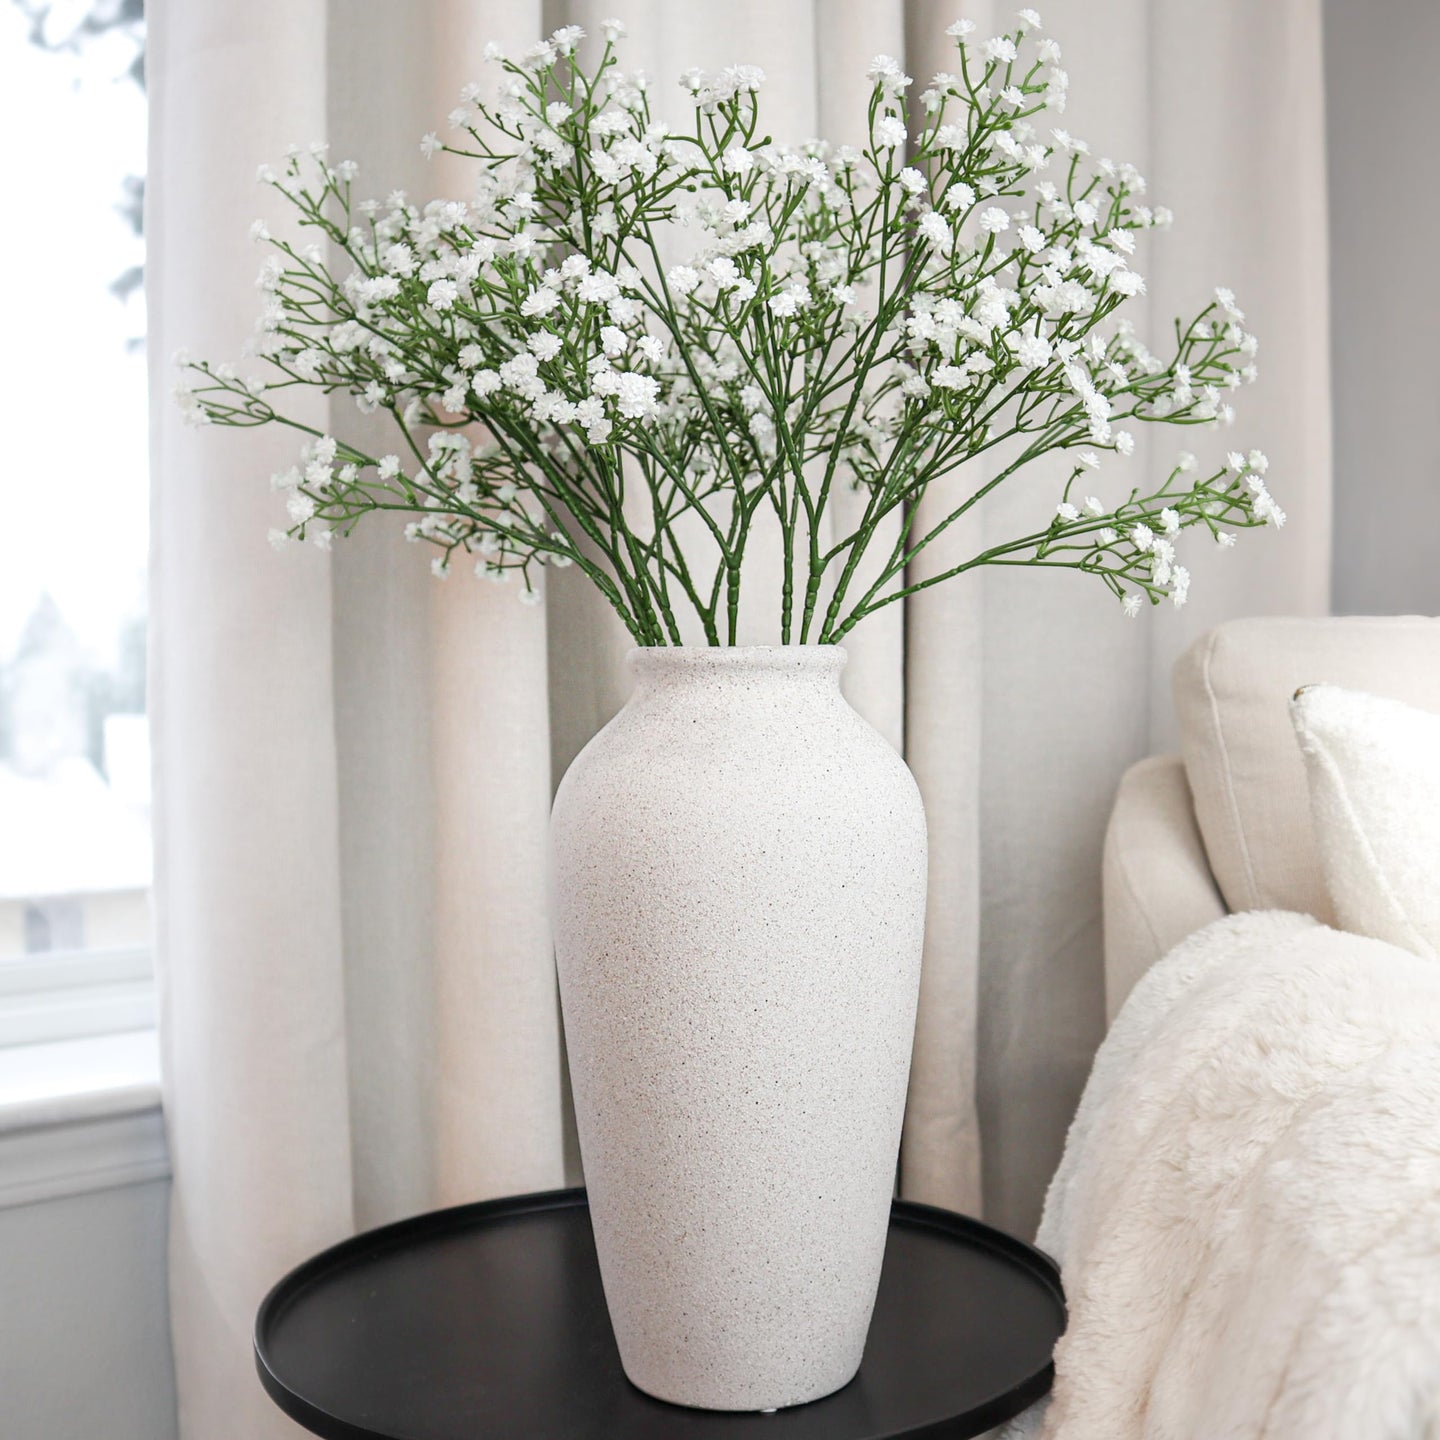 Laurel&Vine 12" Tall White Ceramic Vase, Speckled Textured Minimalist, with 15 Stems of 22" Faux Artificial White Babys Breath, Farmhouse Console Centerpiece Decor, Real Touch Fake Flowers in Vase